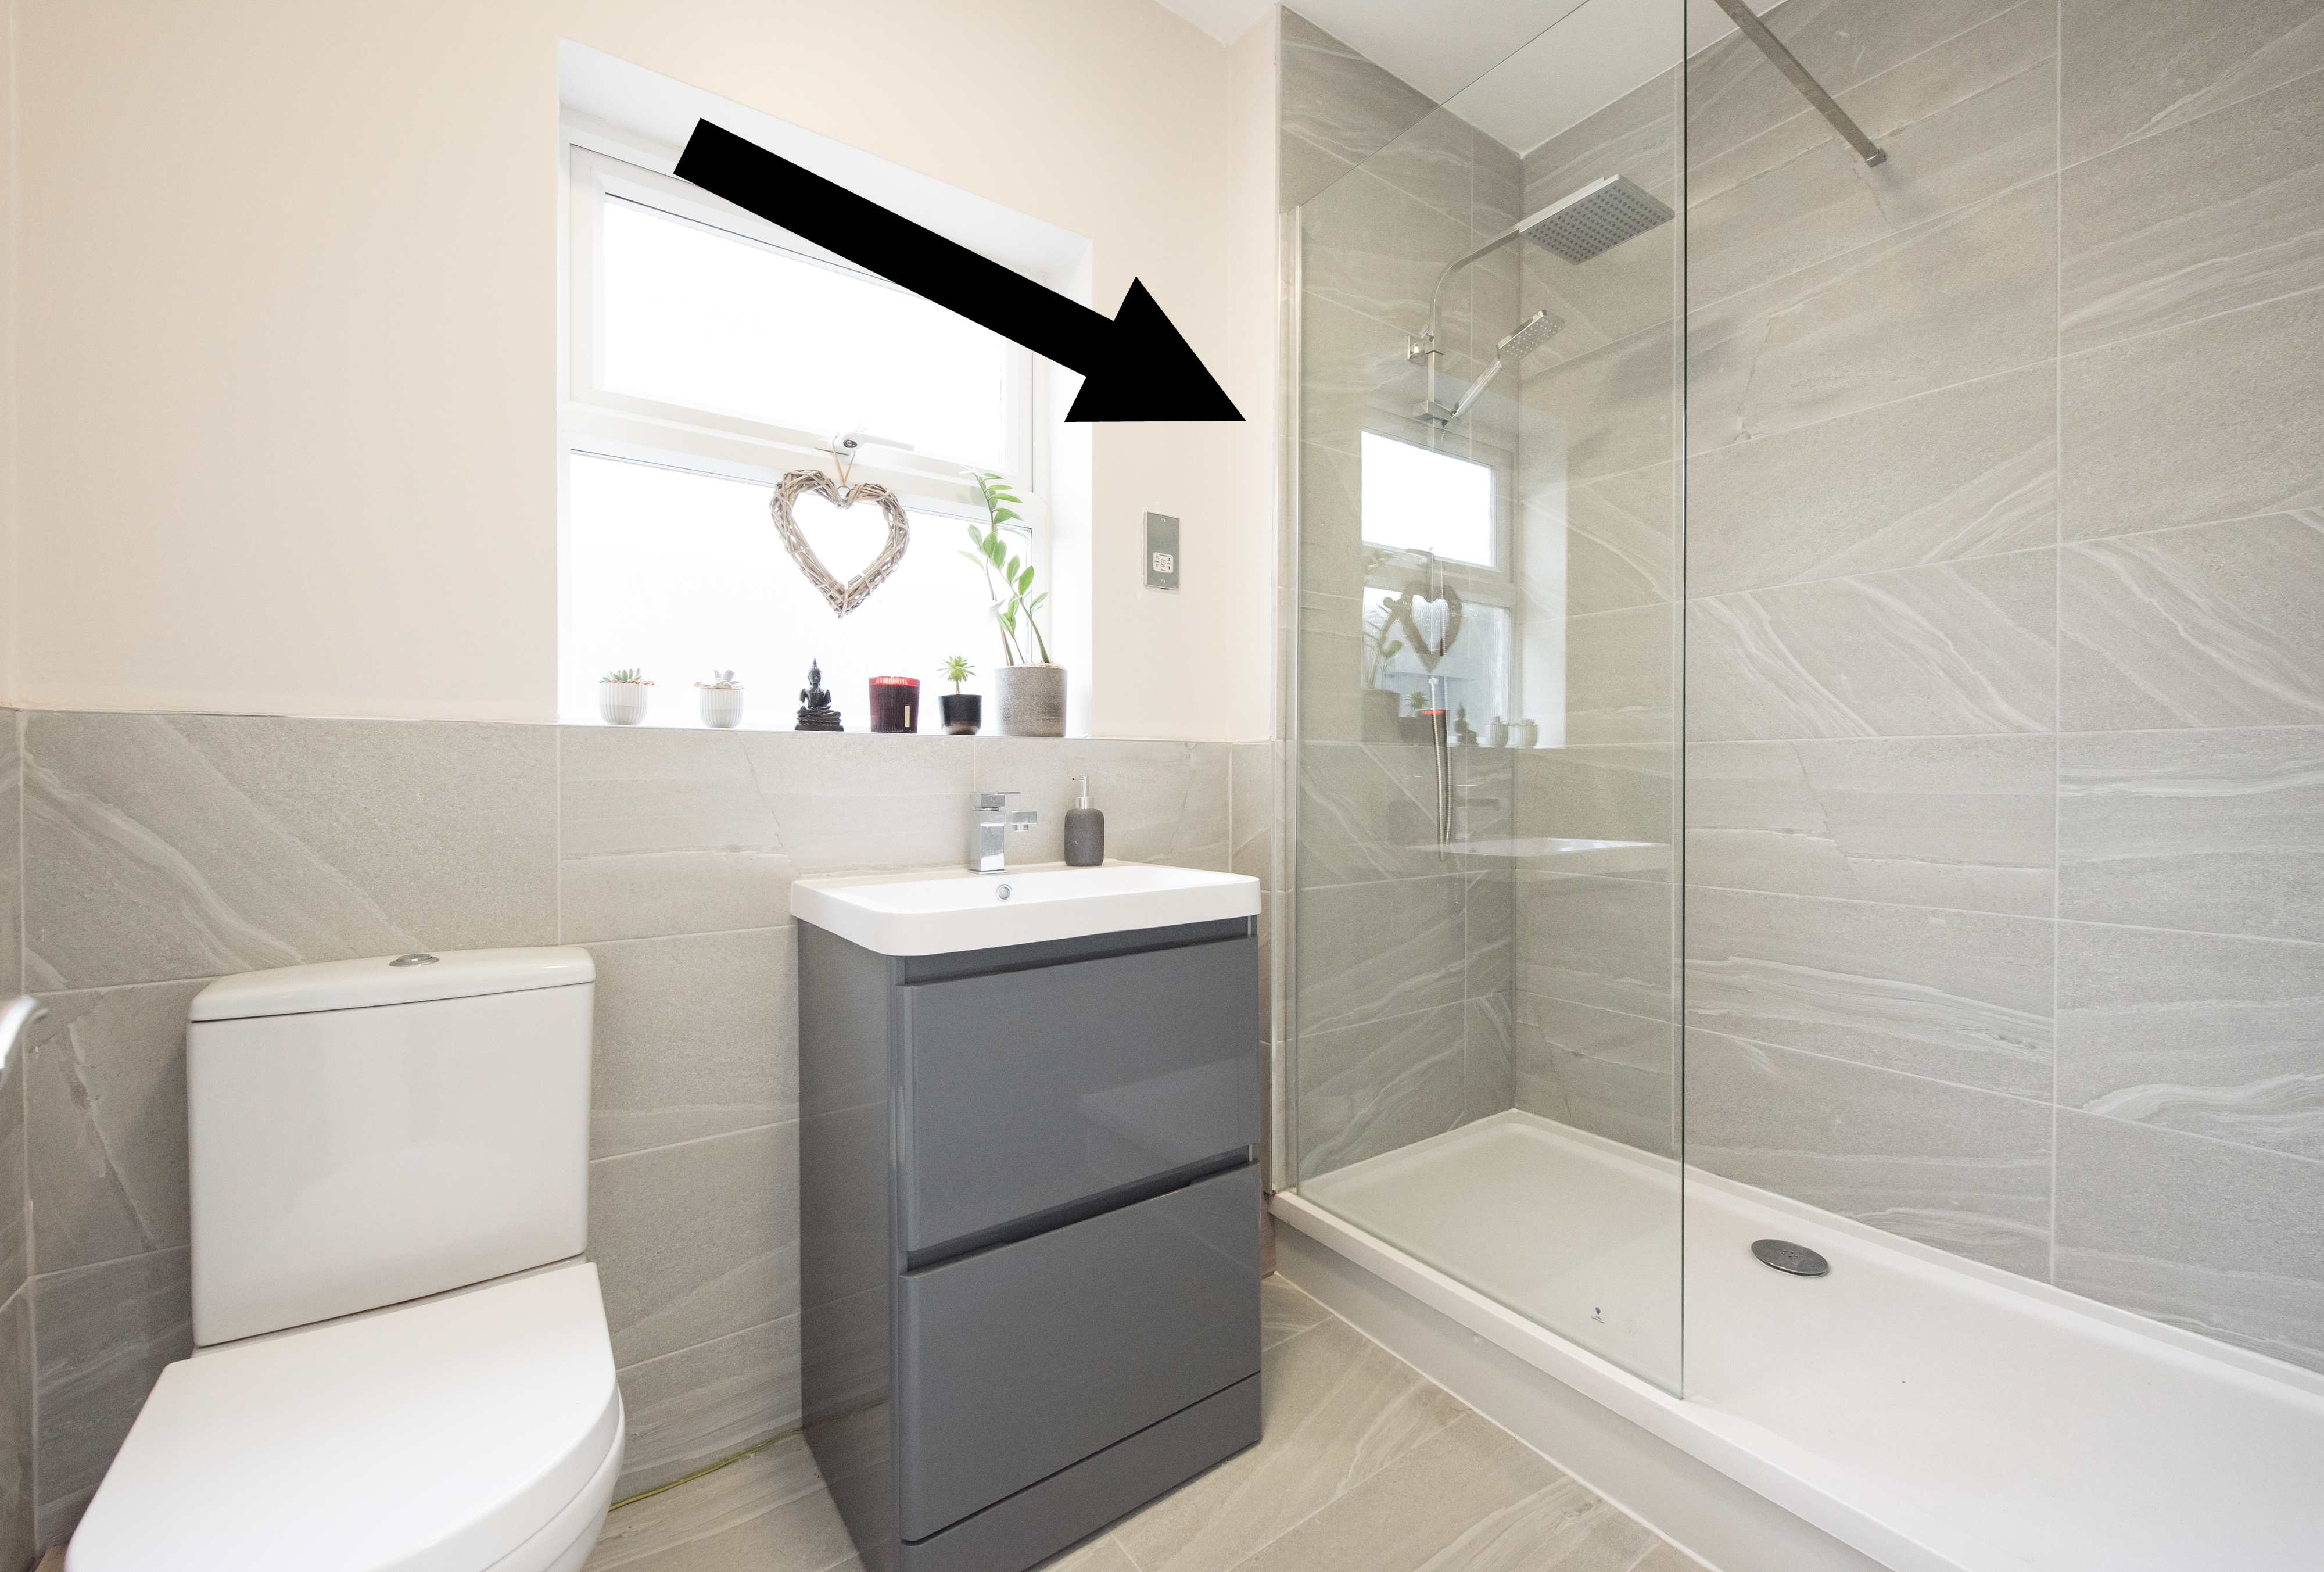 Arrow pointing to a glass shower door